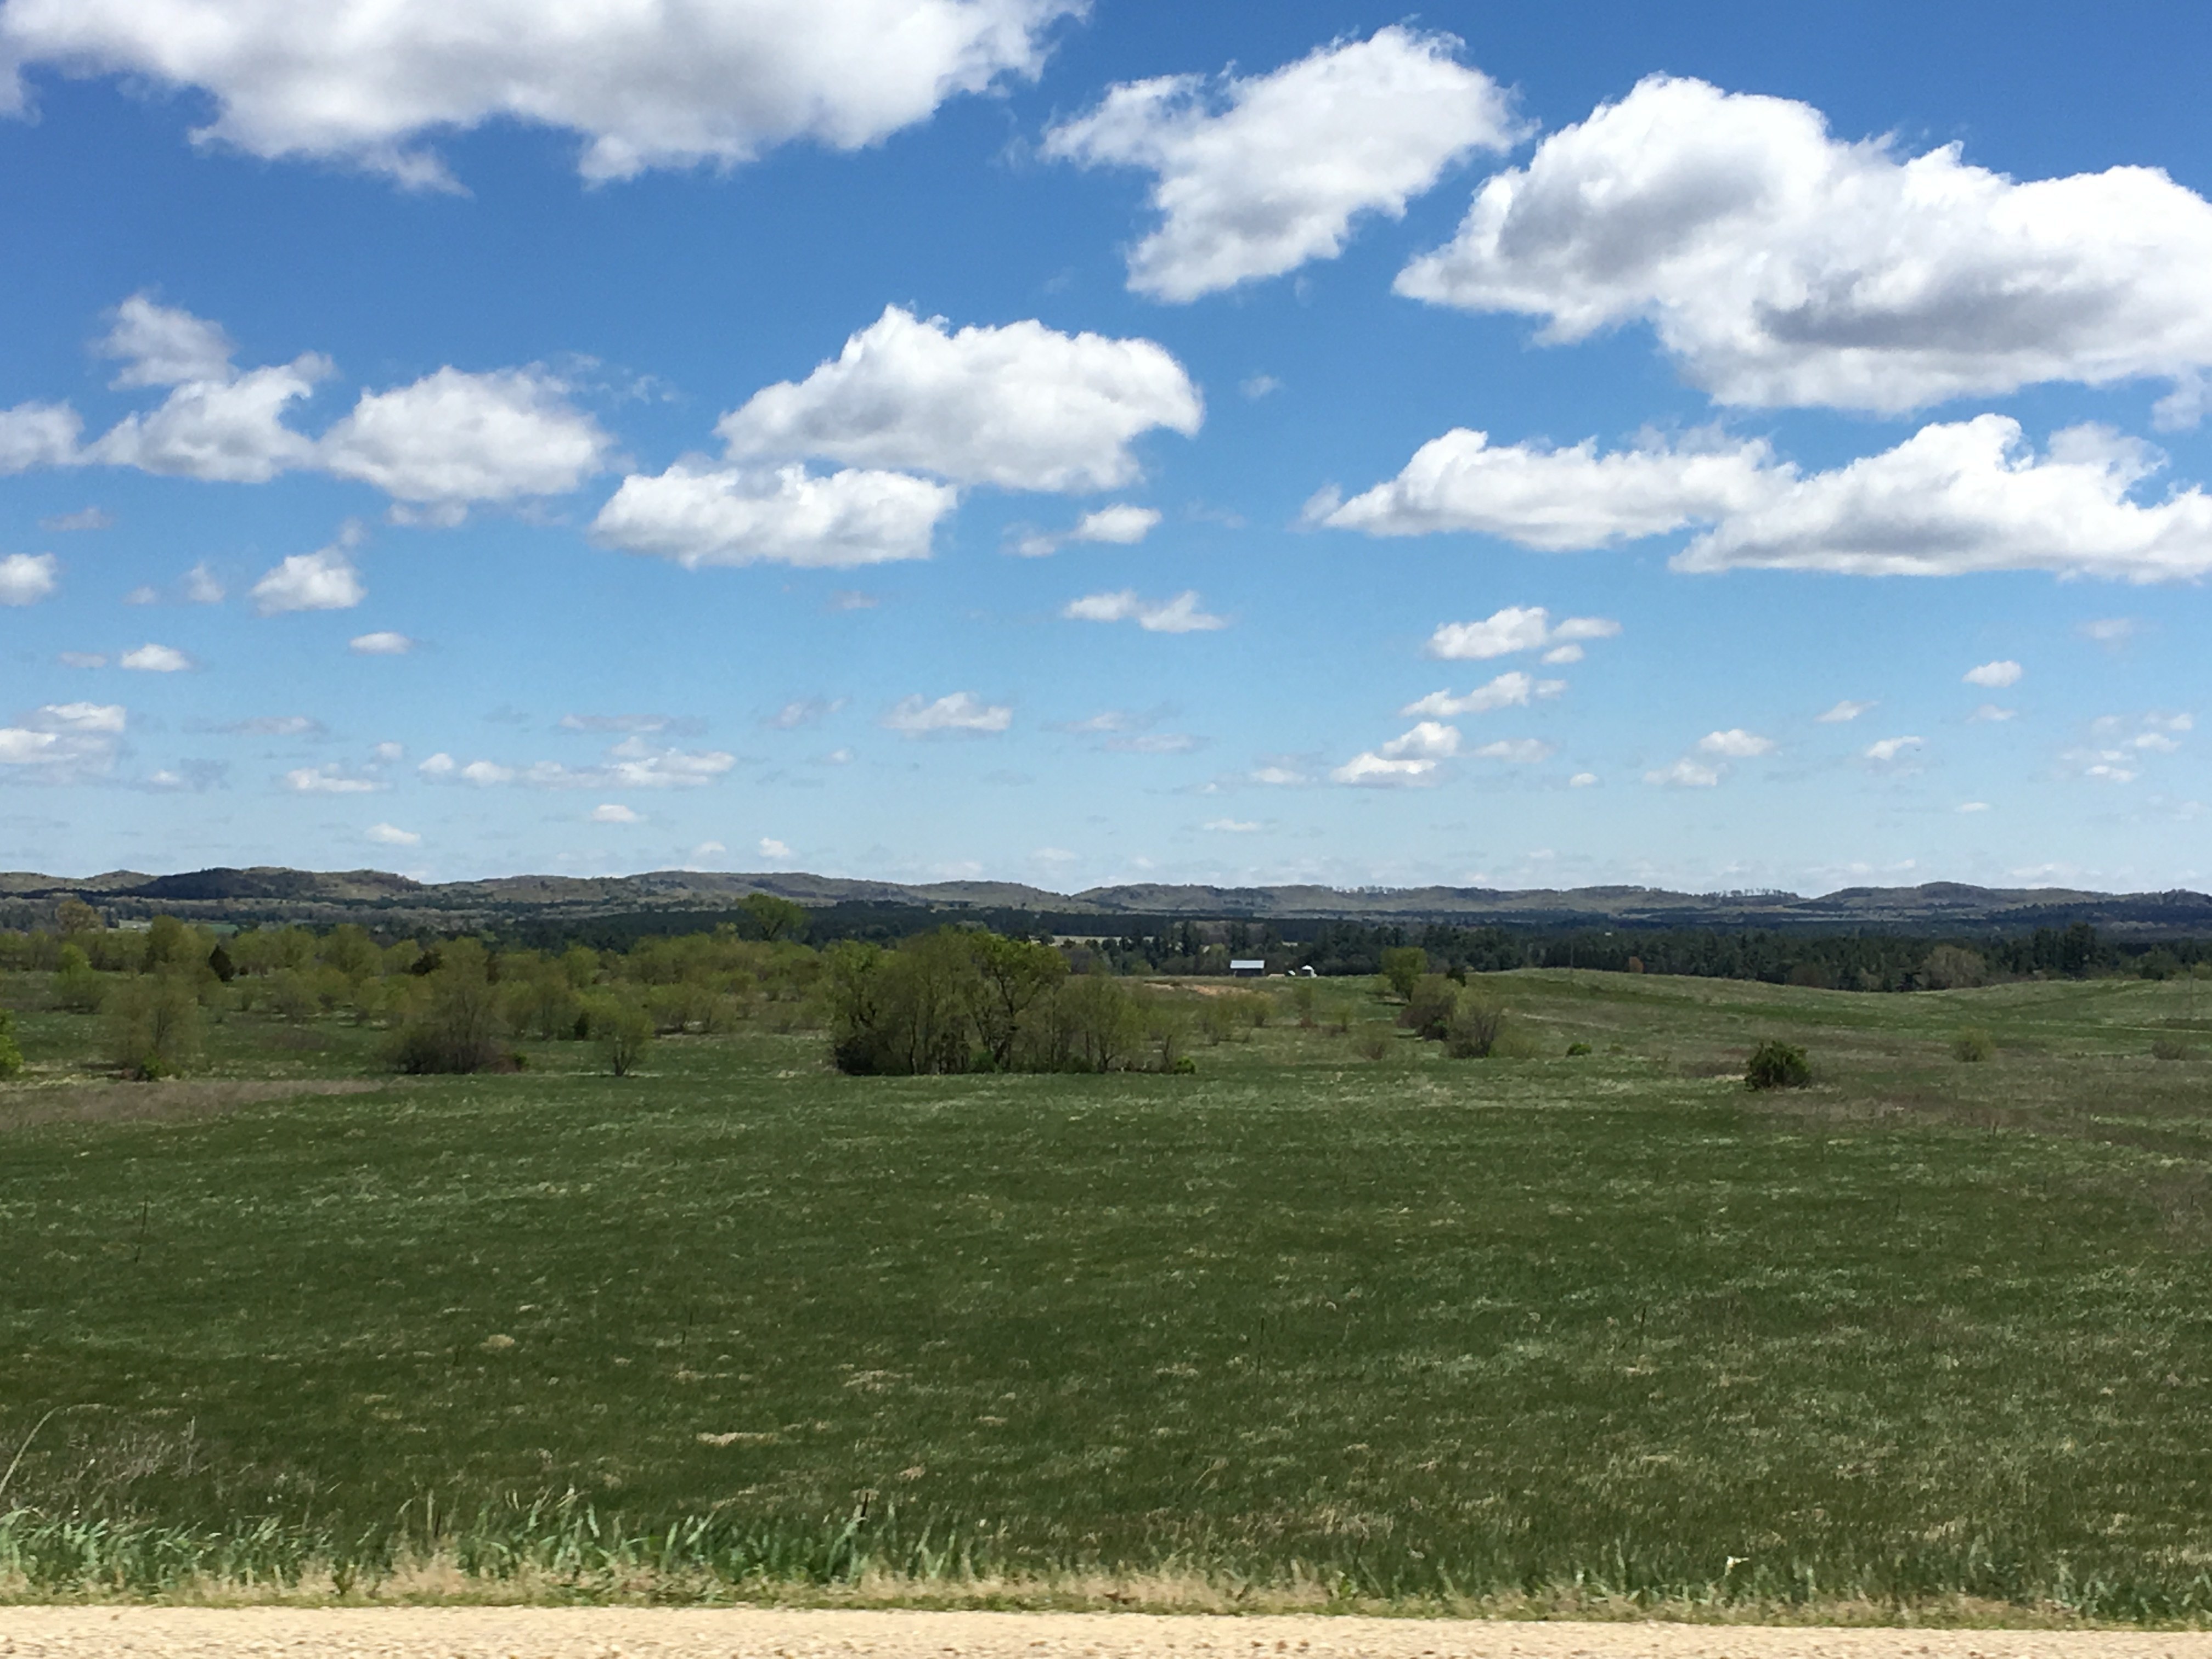 #RonOntheRoad: Beautiful Views On The Drive Between Eau Claire and La Crosse